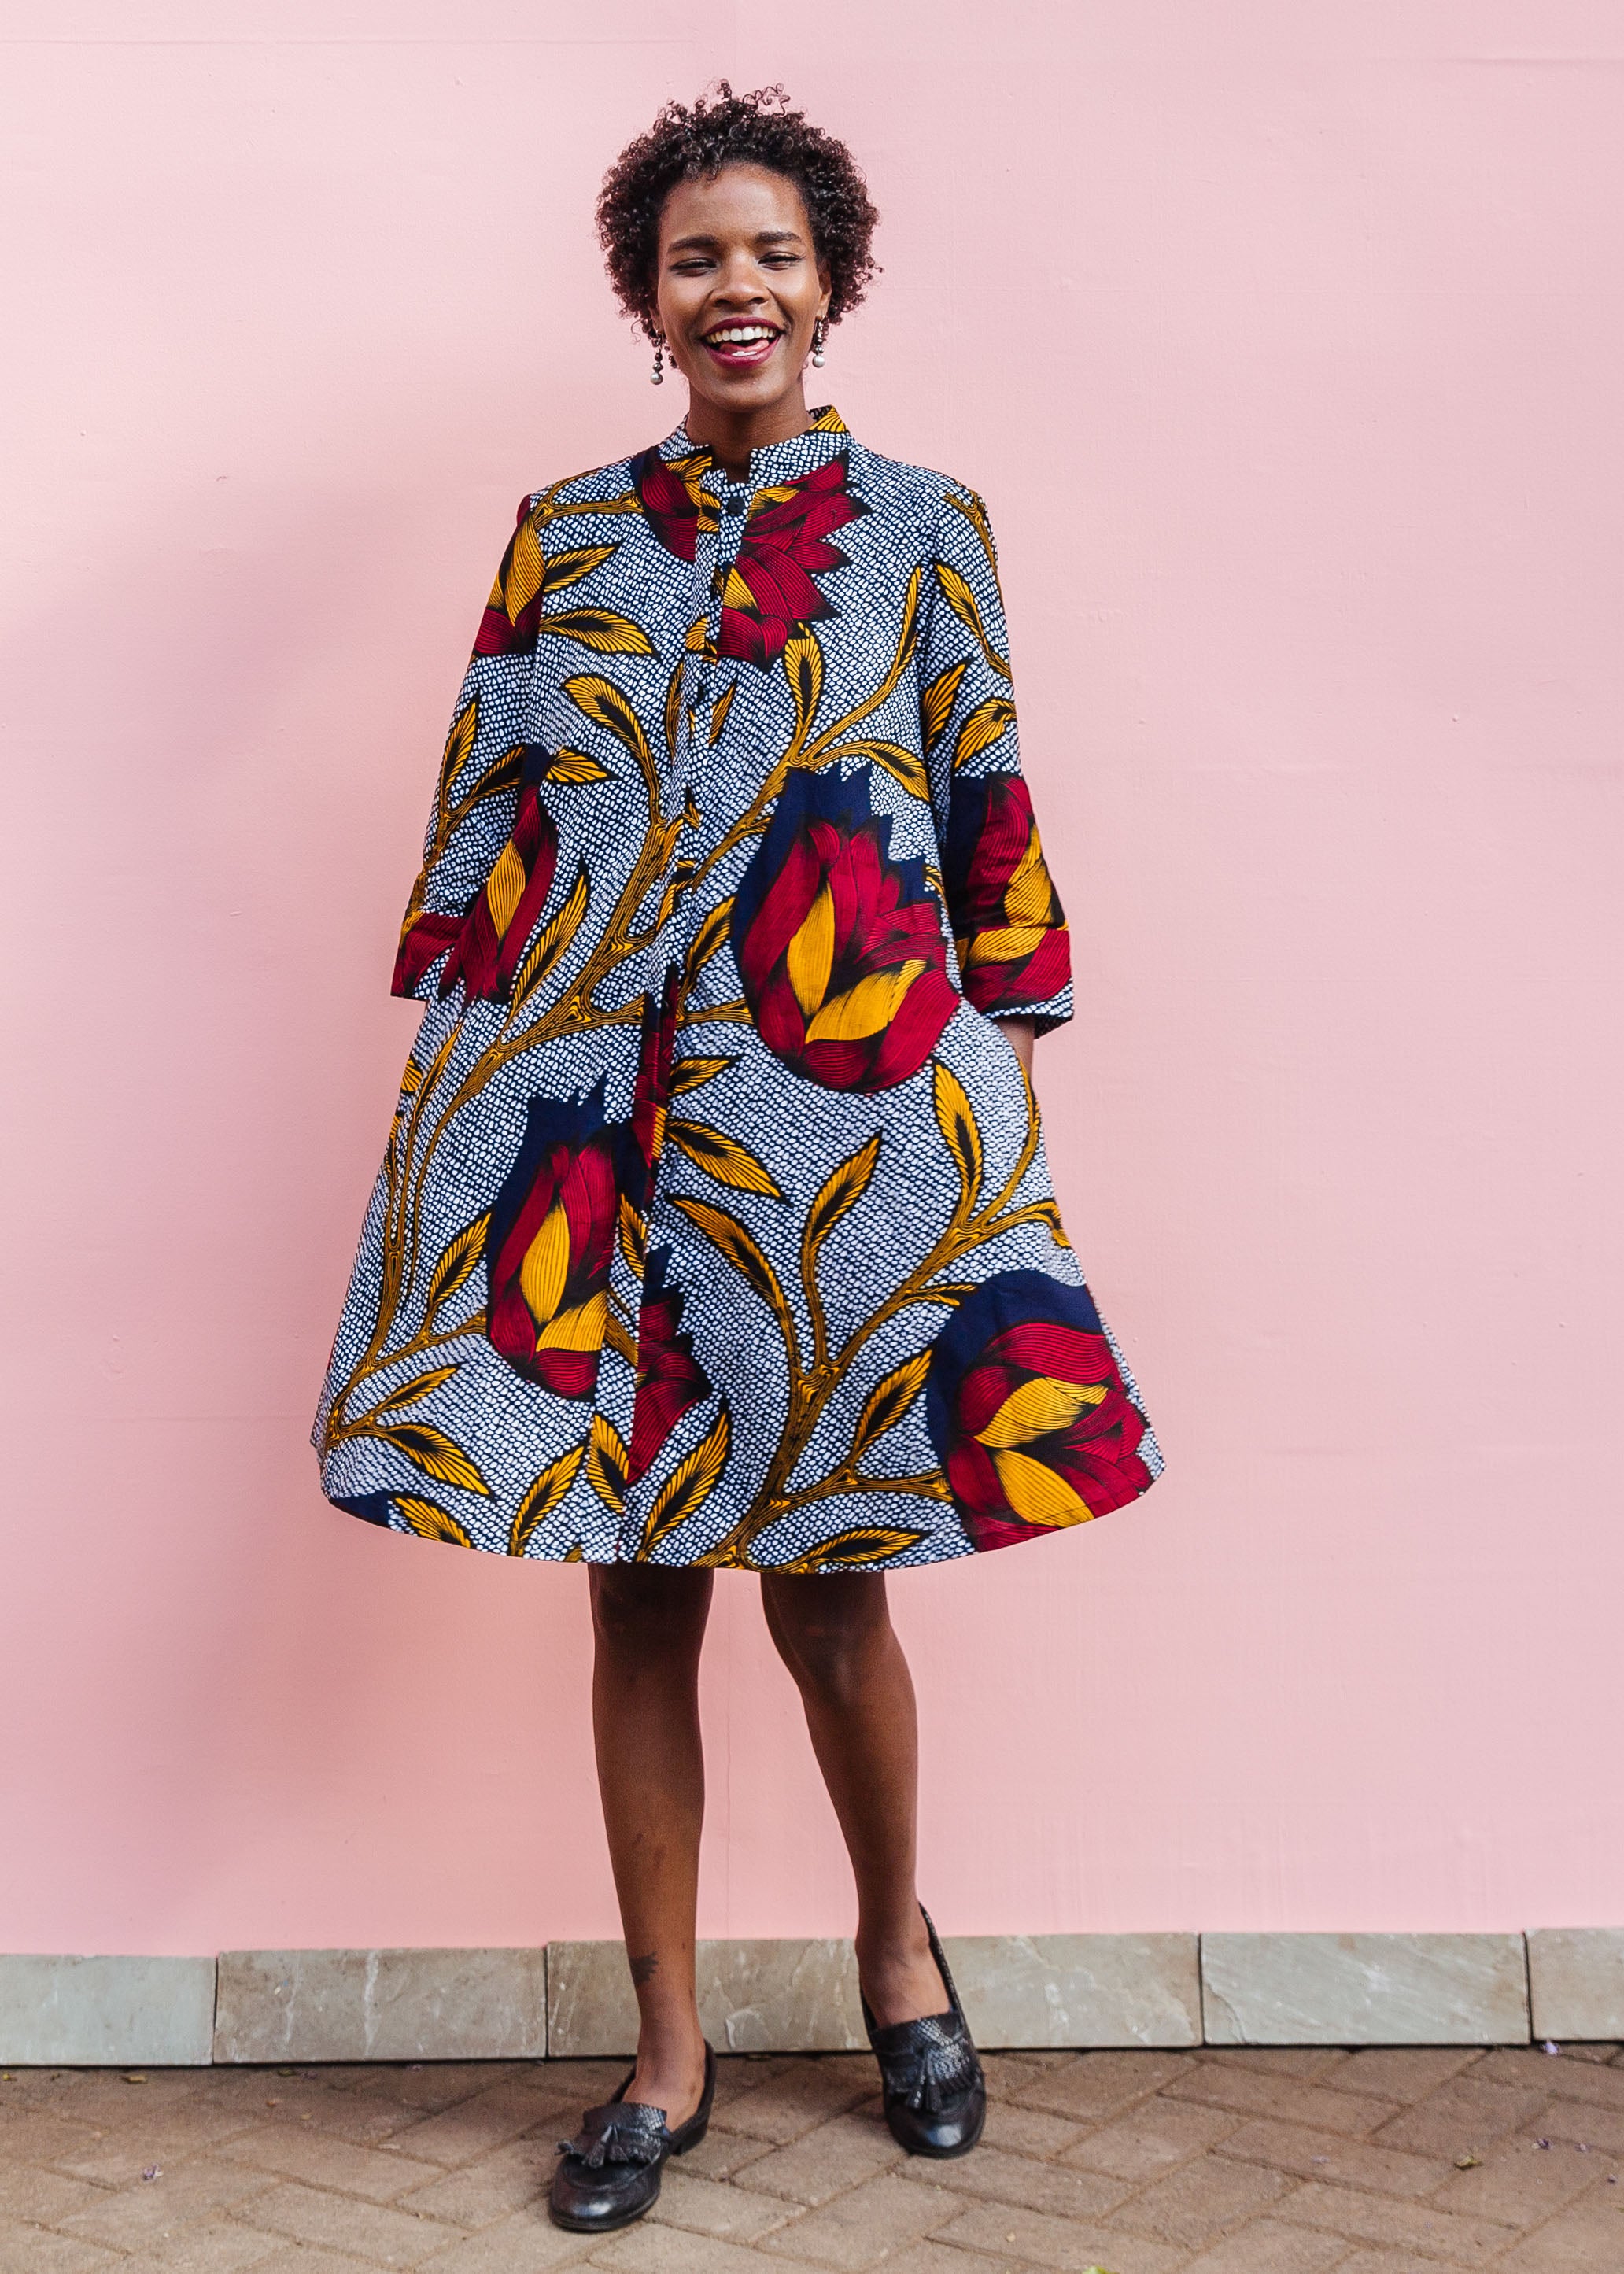 Model wearing red, yellow and navy flower print dress.